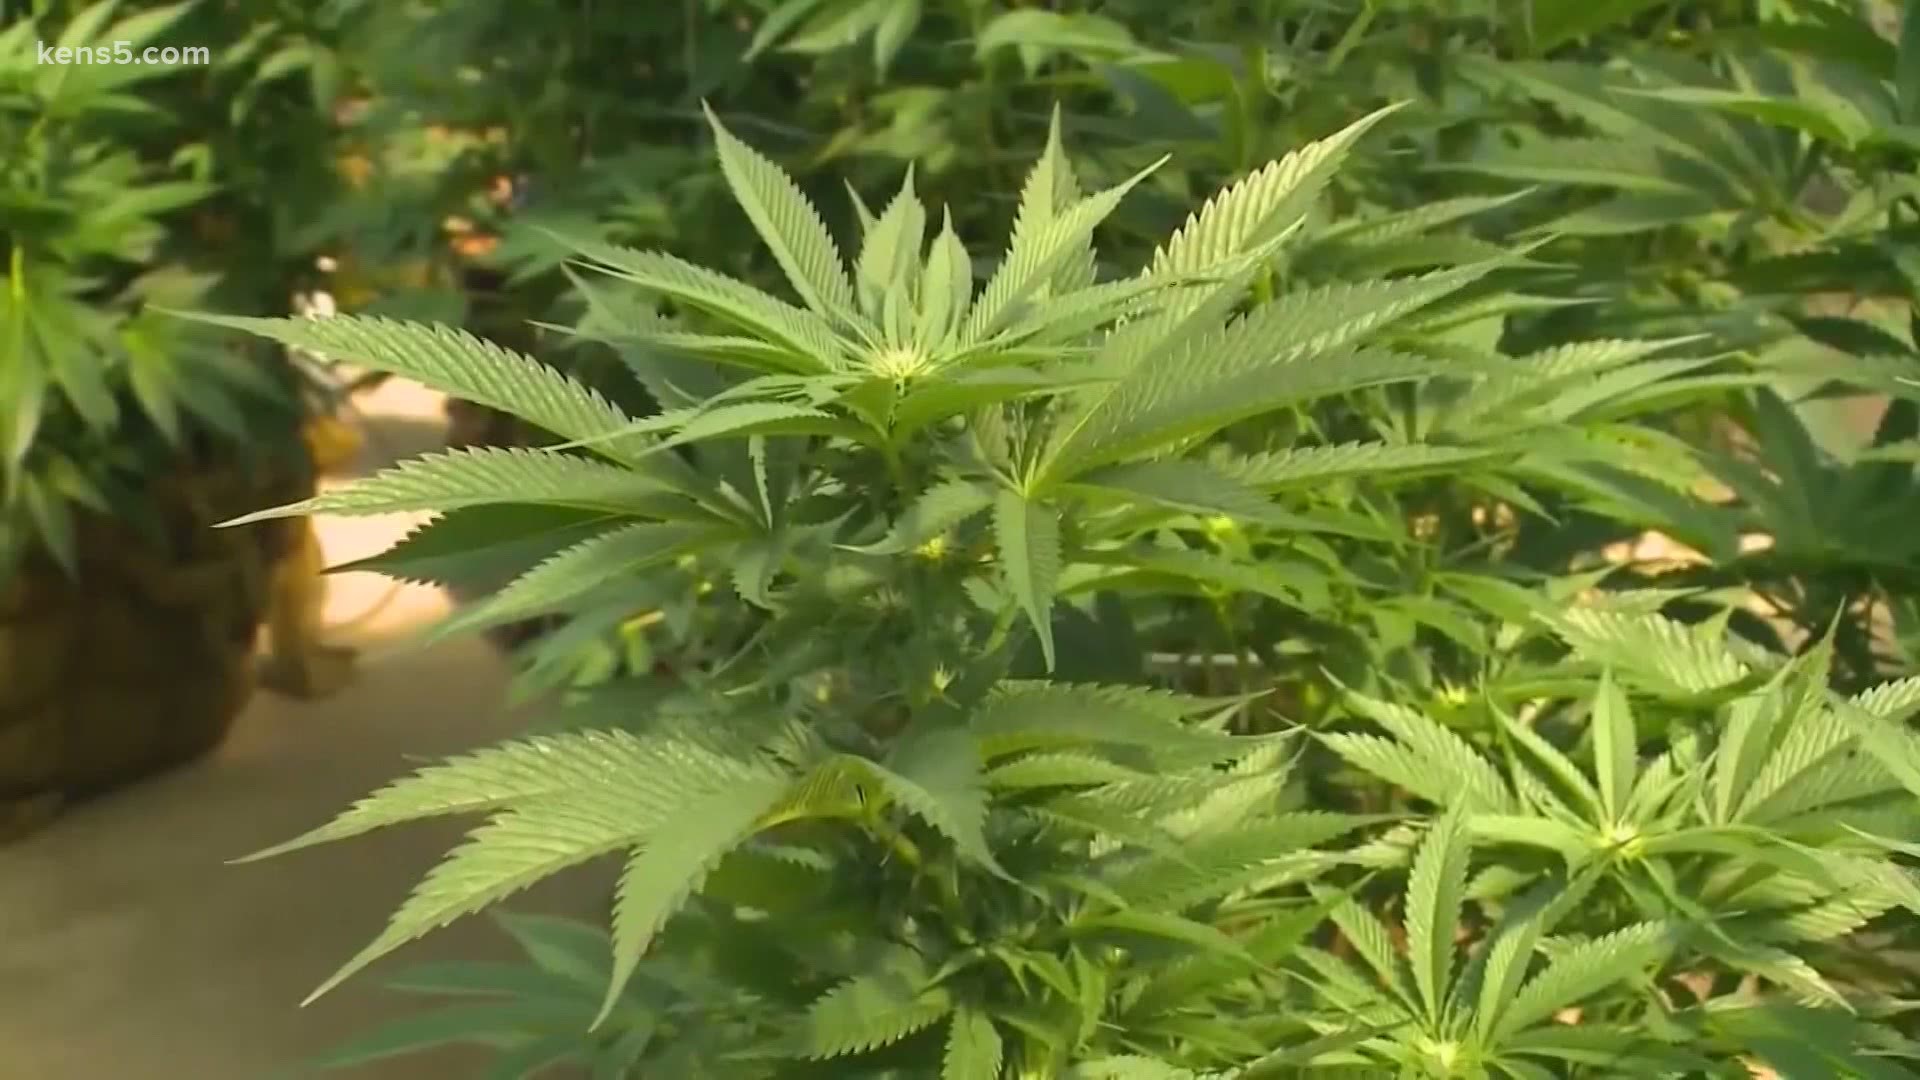 Roland Gutierrez pre-filled a bill, saying that legalizing marijuana could generate 30,000 jobs and $3.2 billion every two years to help with a budget shortfall.